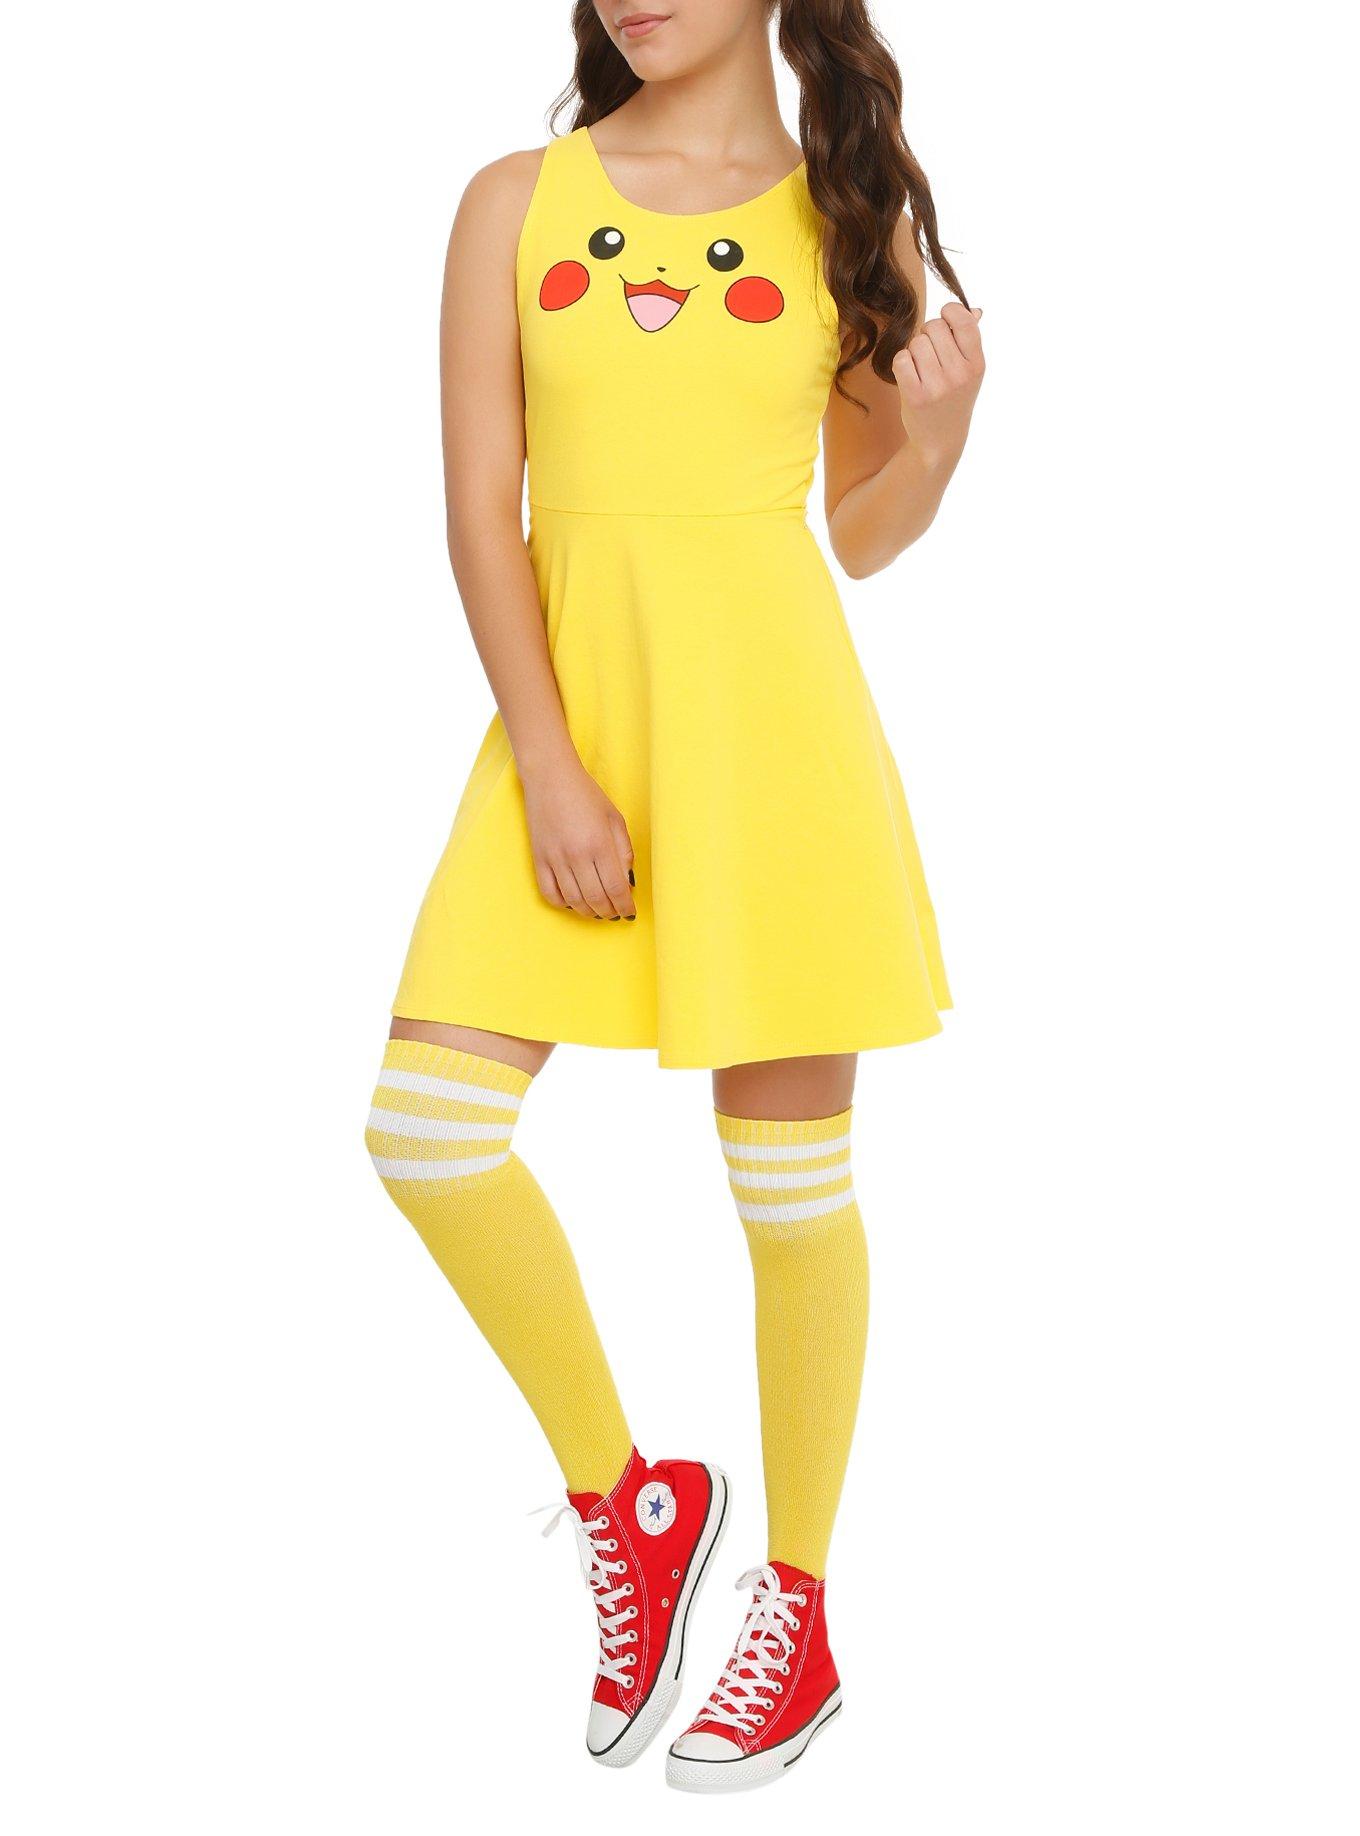 Pokemon Pikachu Anime Patches for Clothing DIY T-shirt Dresses